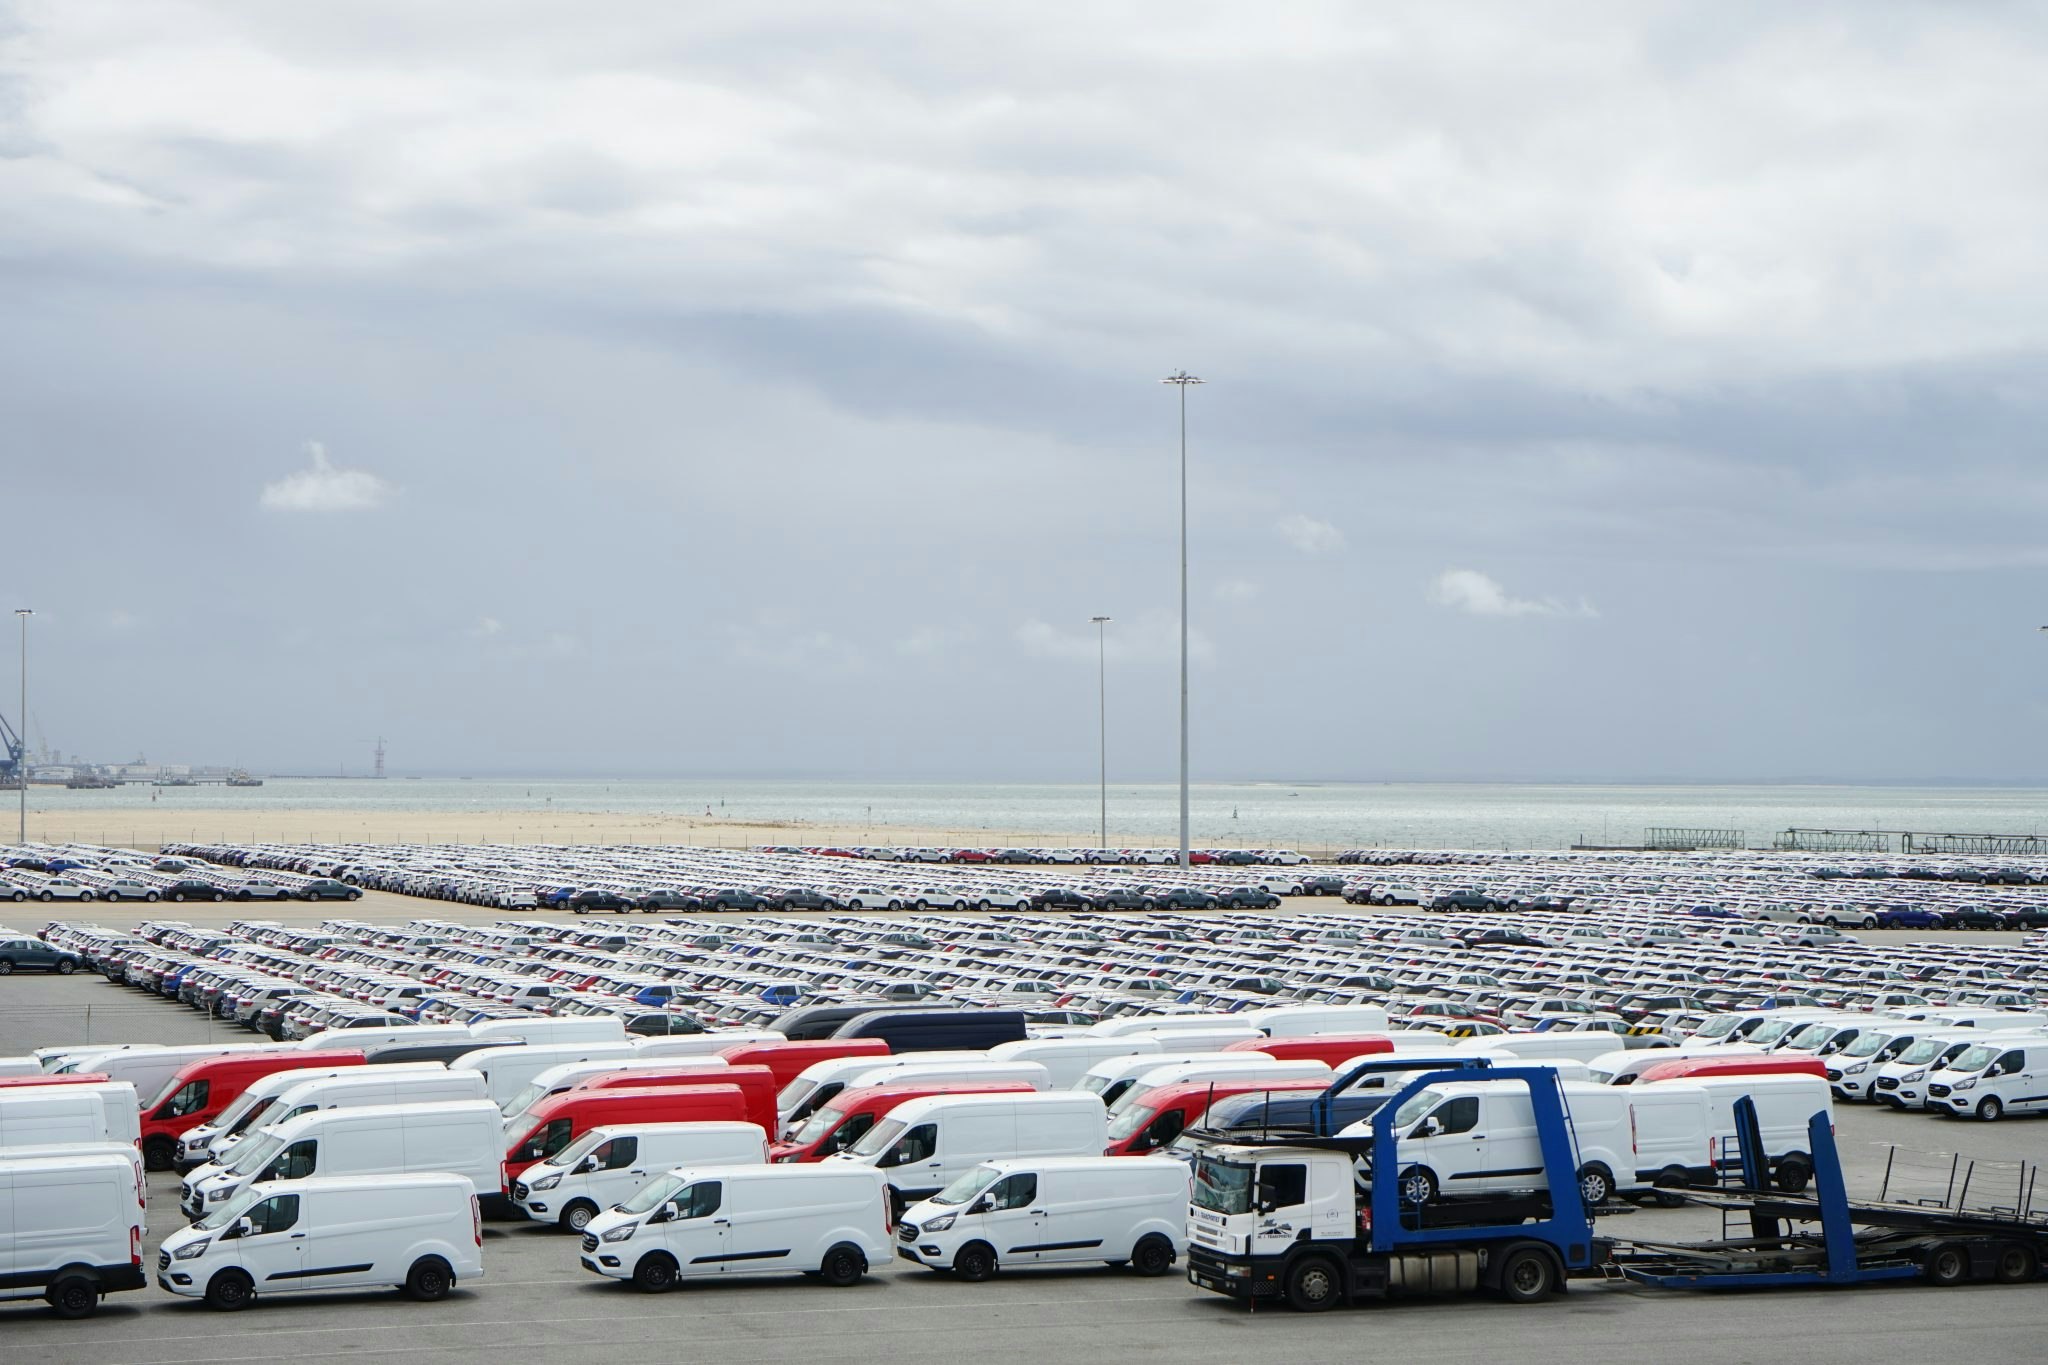 An image of thousands of newly built cars and vans parked in front of the sea at Setubal port